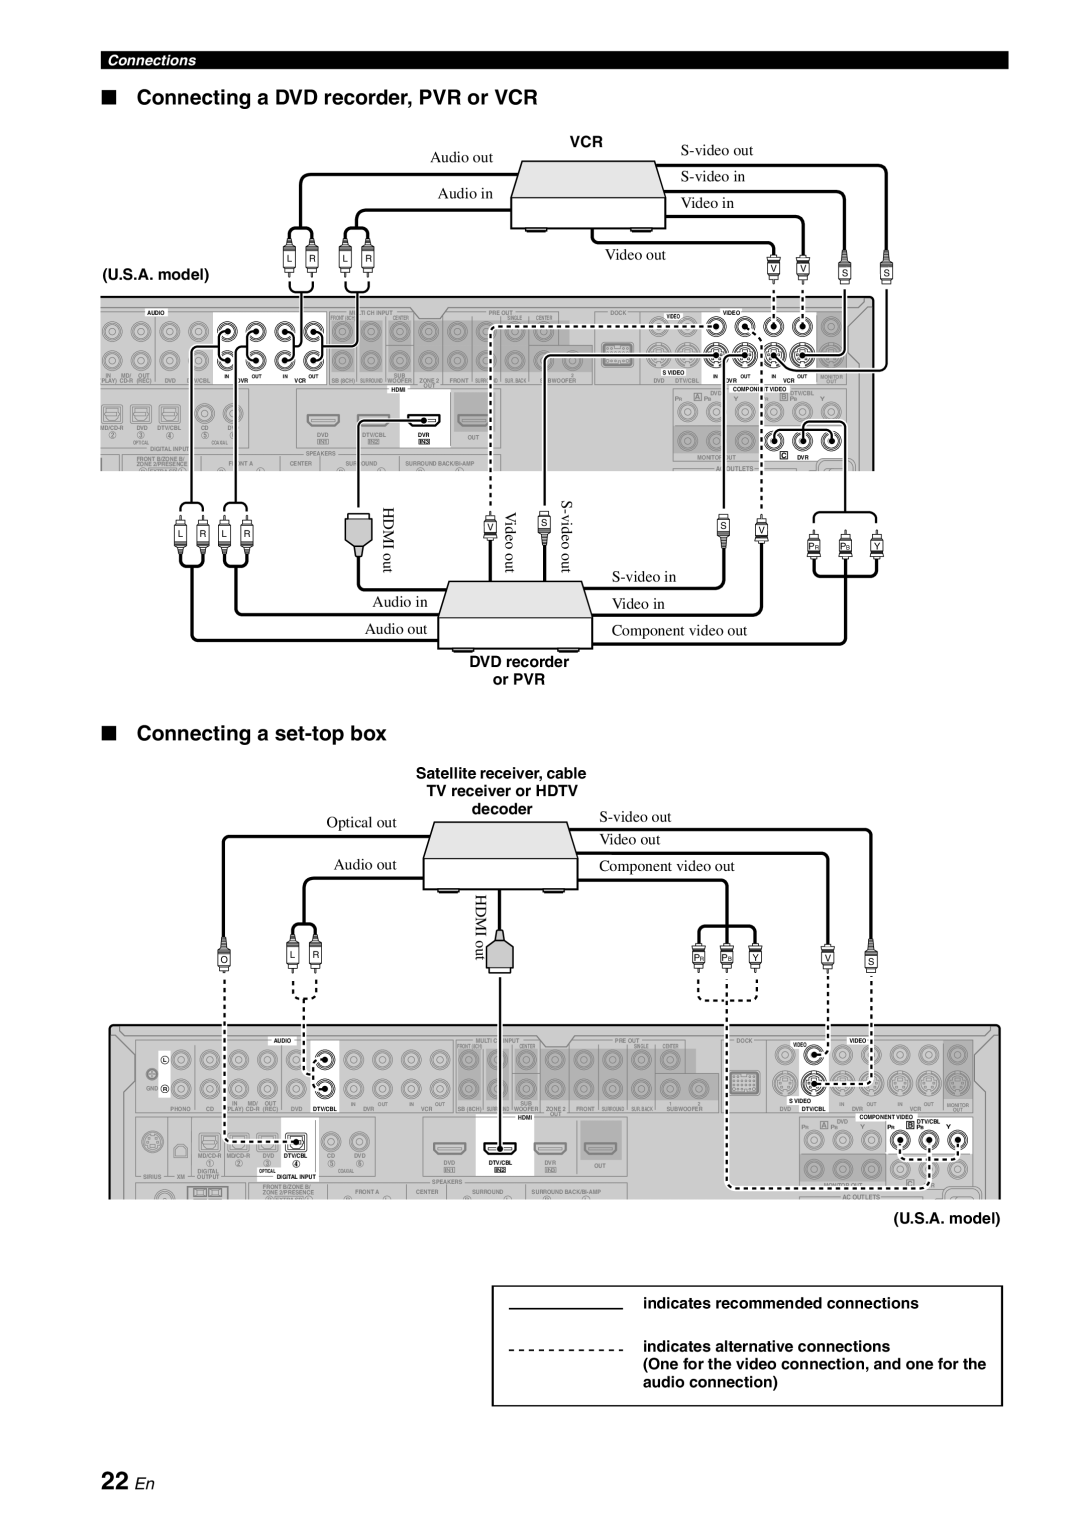 Yamaha HTR-6180 owner manual 22 En, Connecting a DVD recorder, PVR or VCR, Connecting a set-topbox 